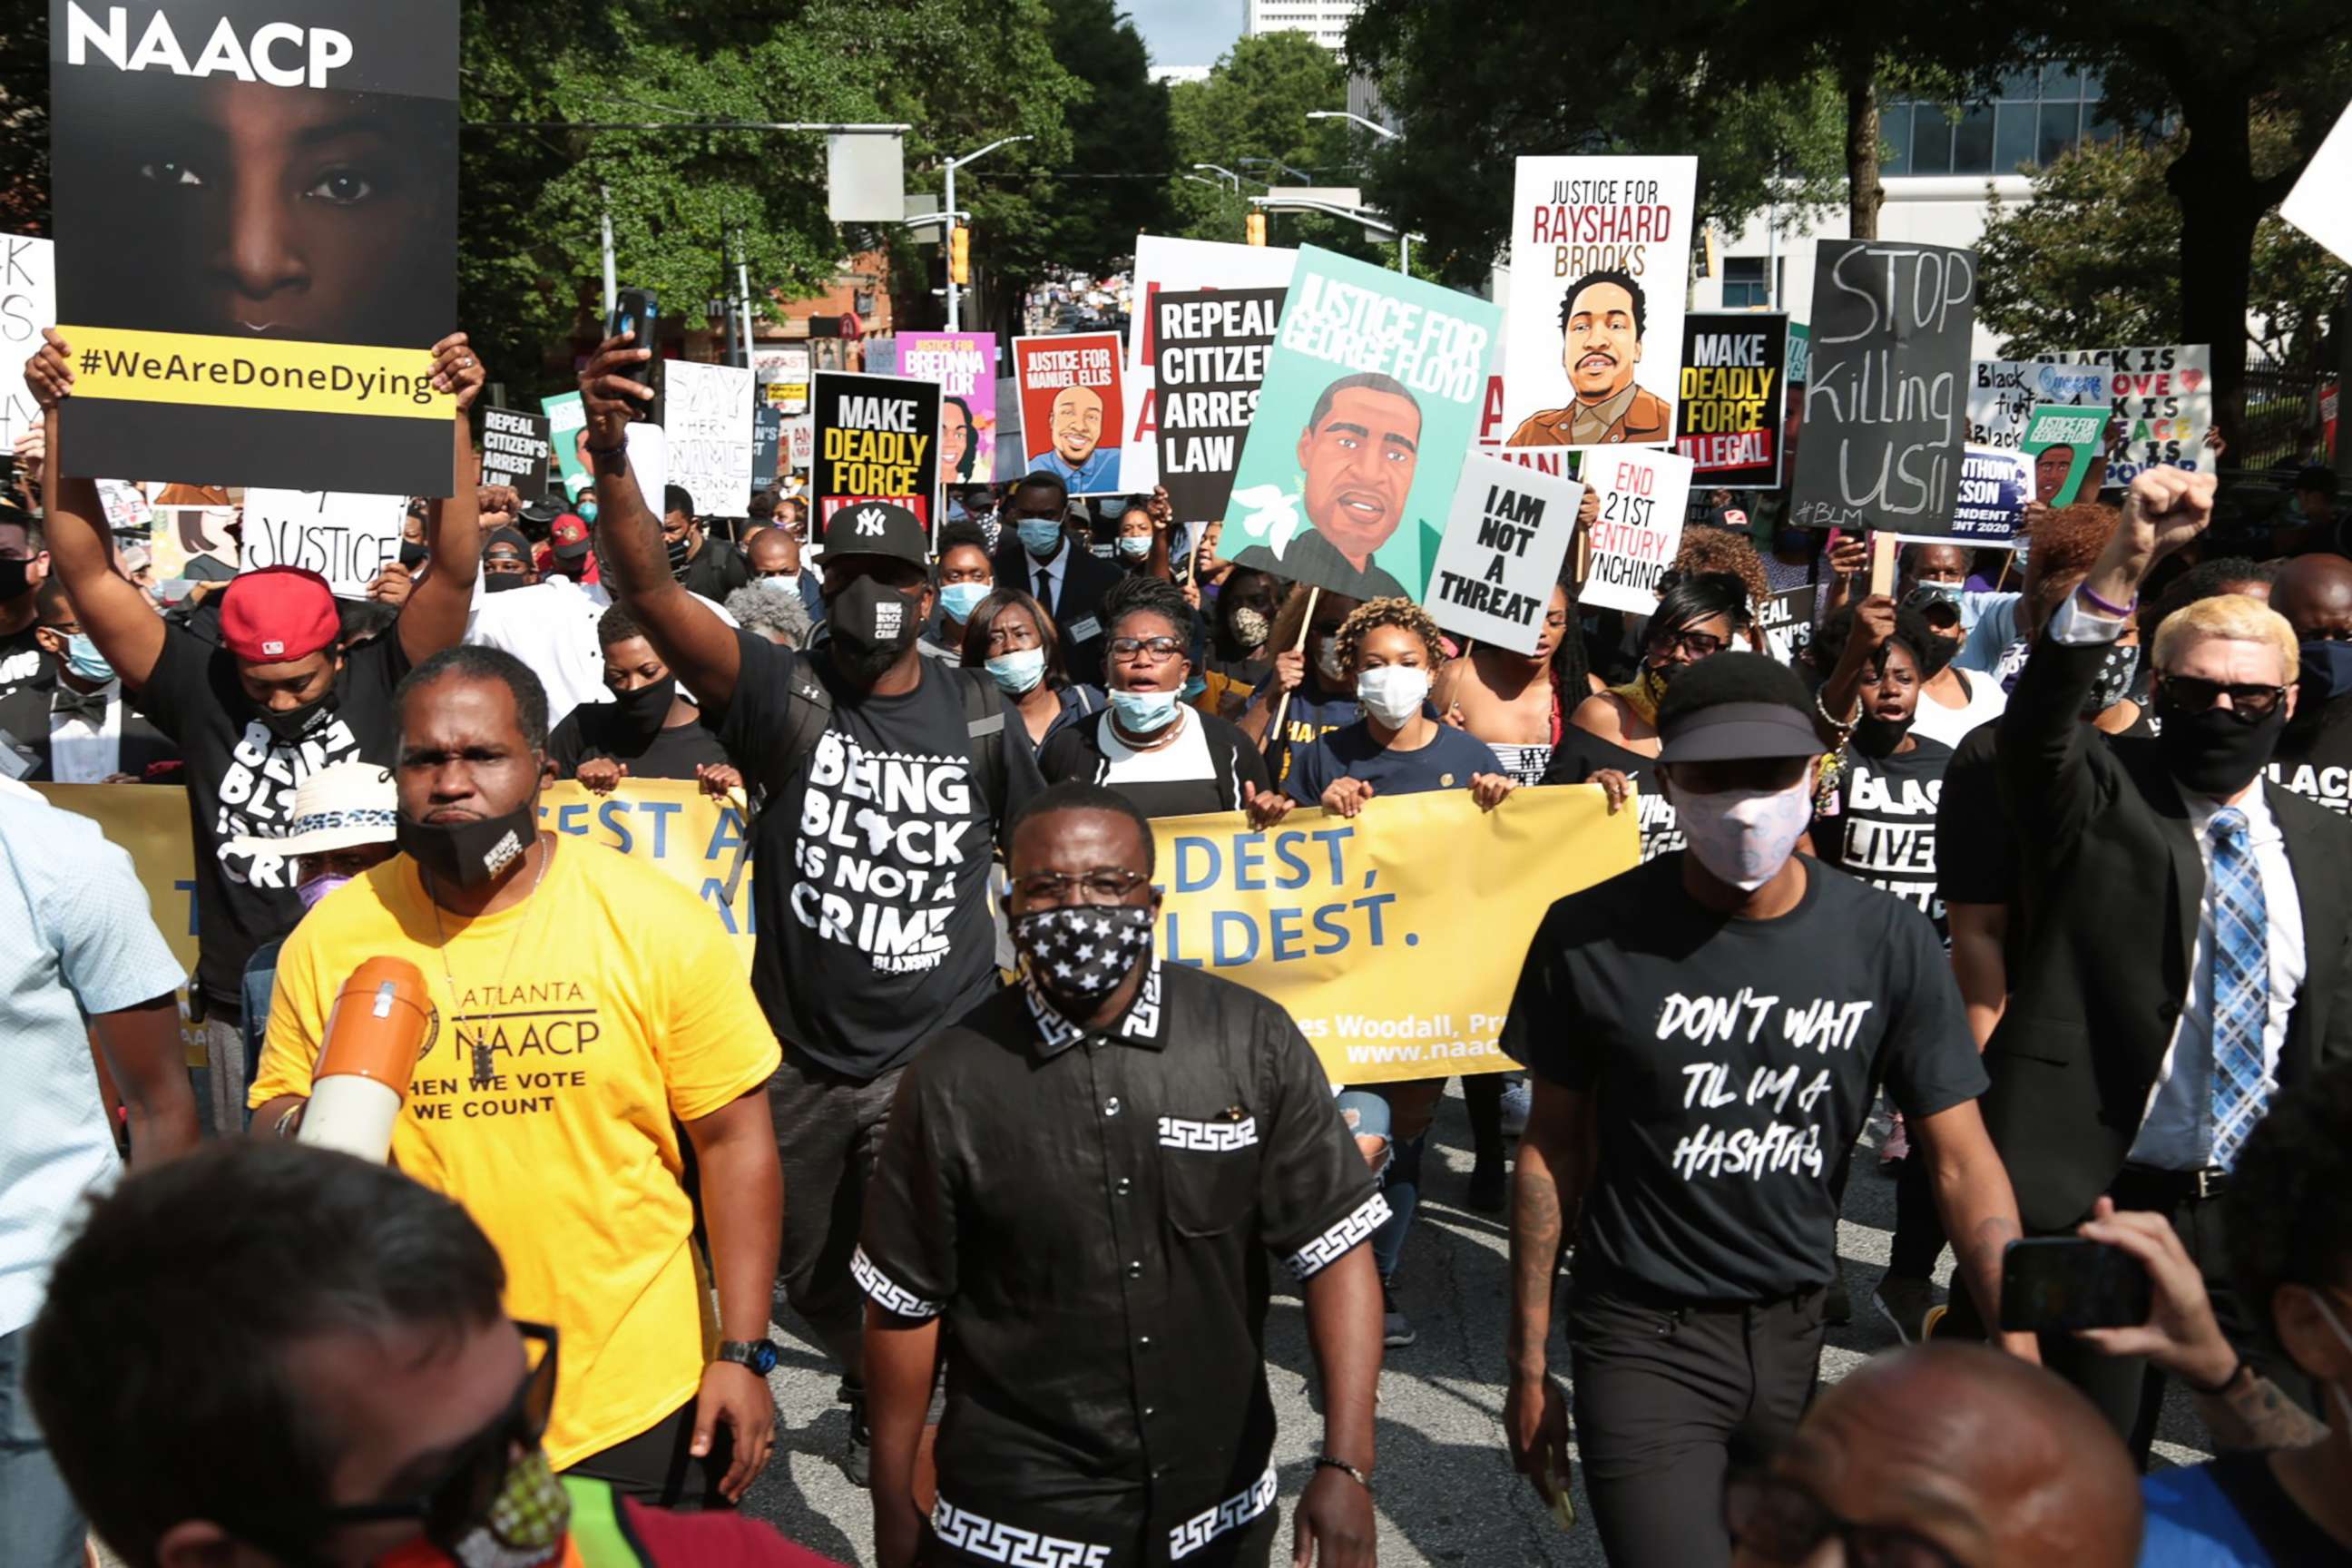 PHOTO: People gather for a civil rights National Association for the Advancement of Colored People (NAACP) protest march, June 15, 2020 in Atlanta.